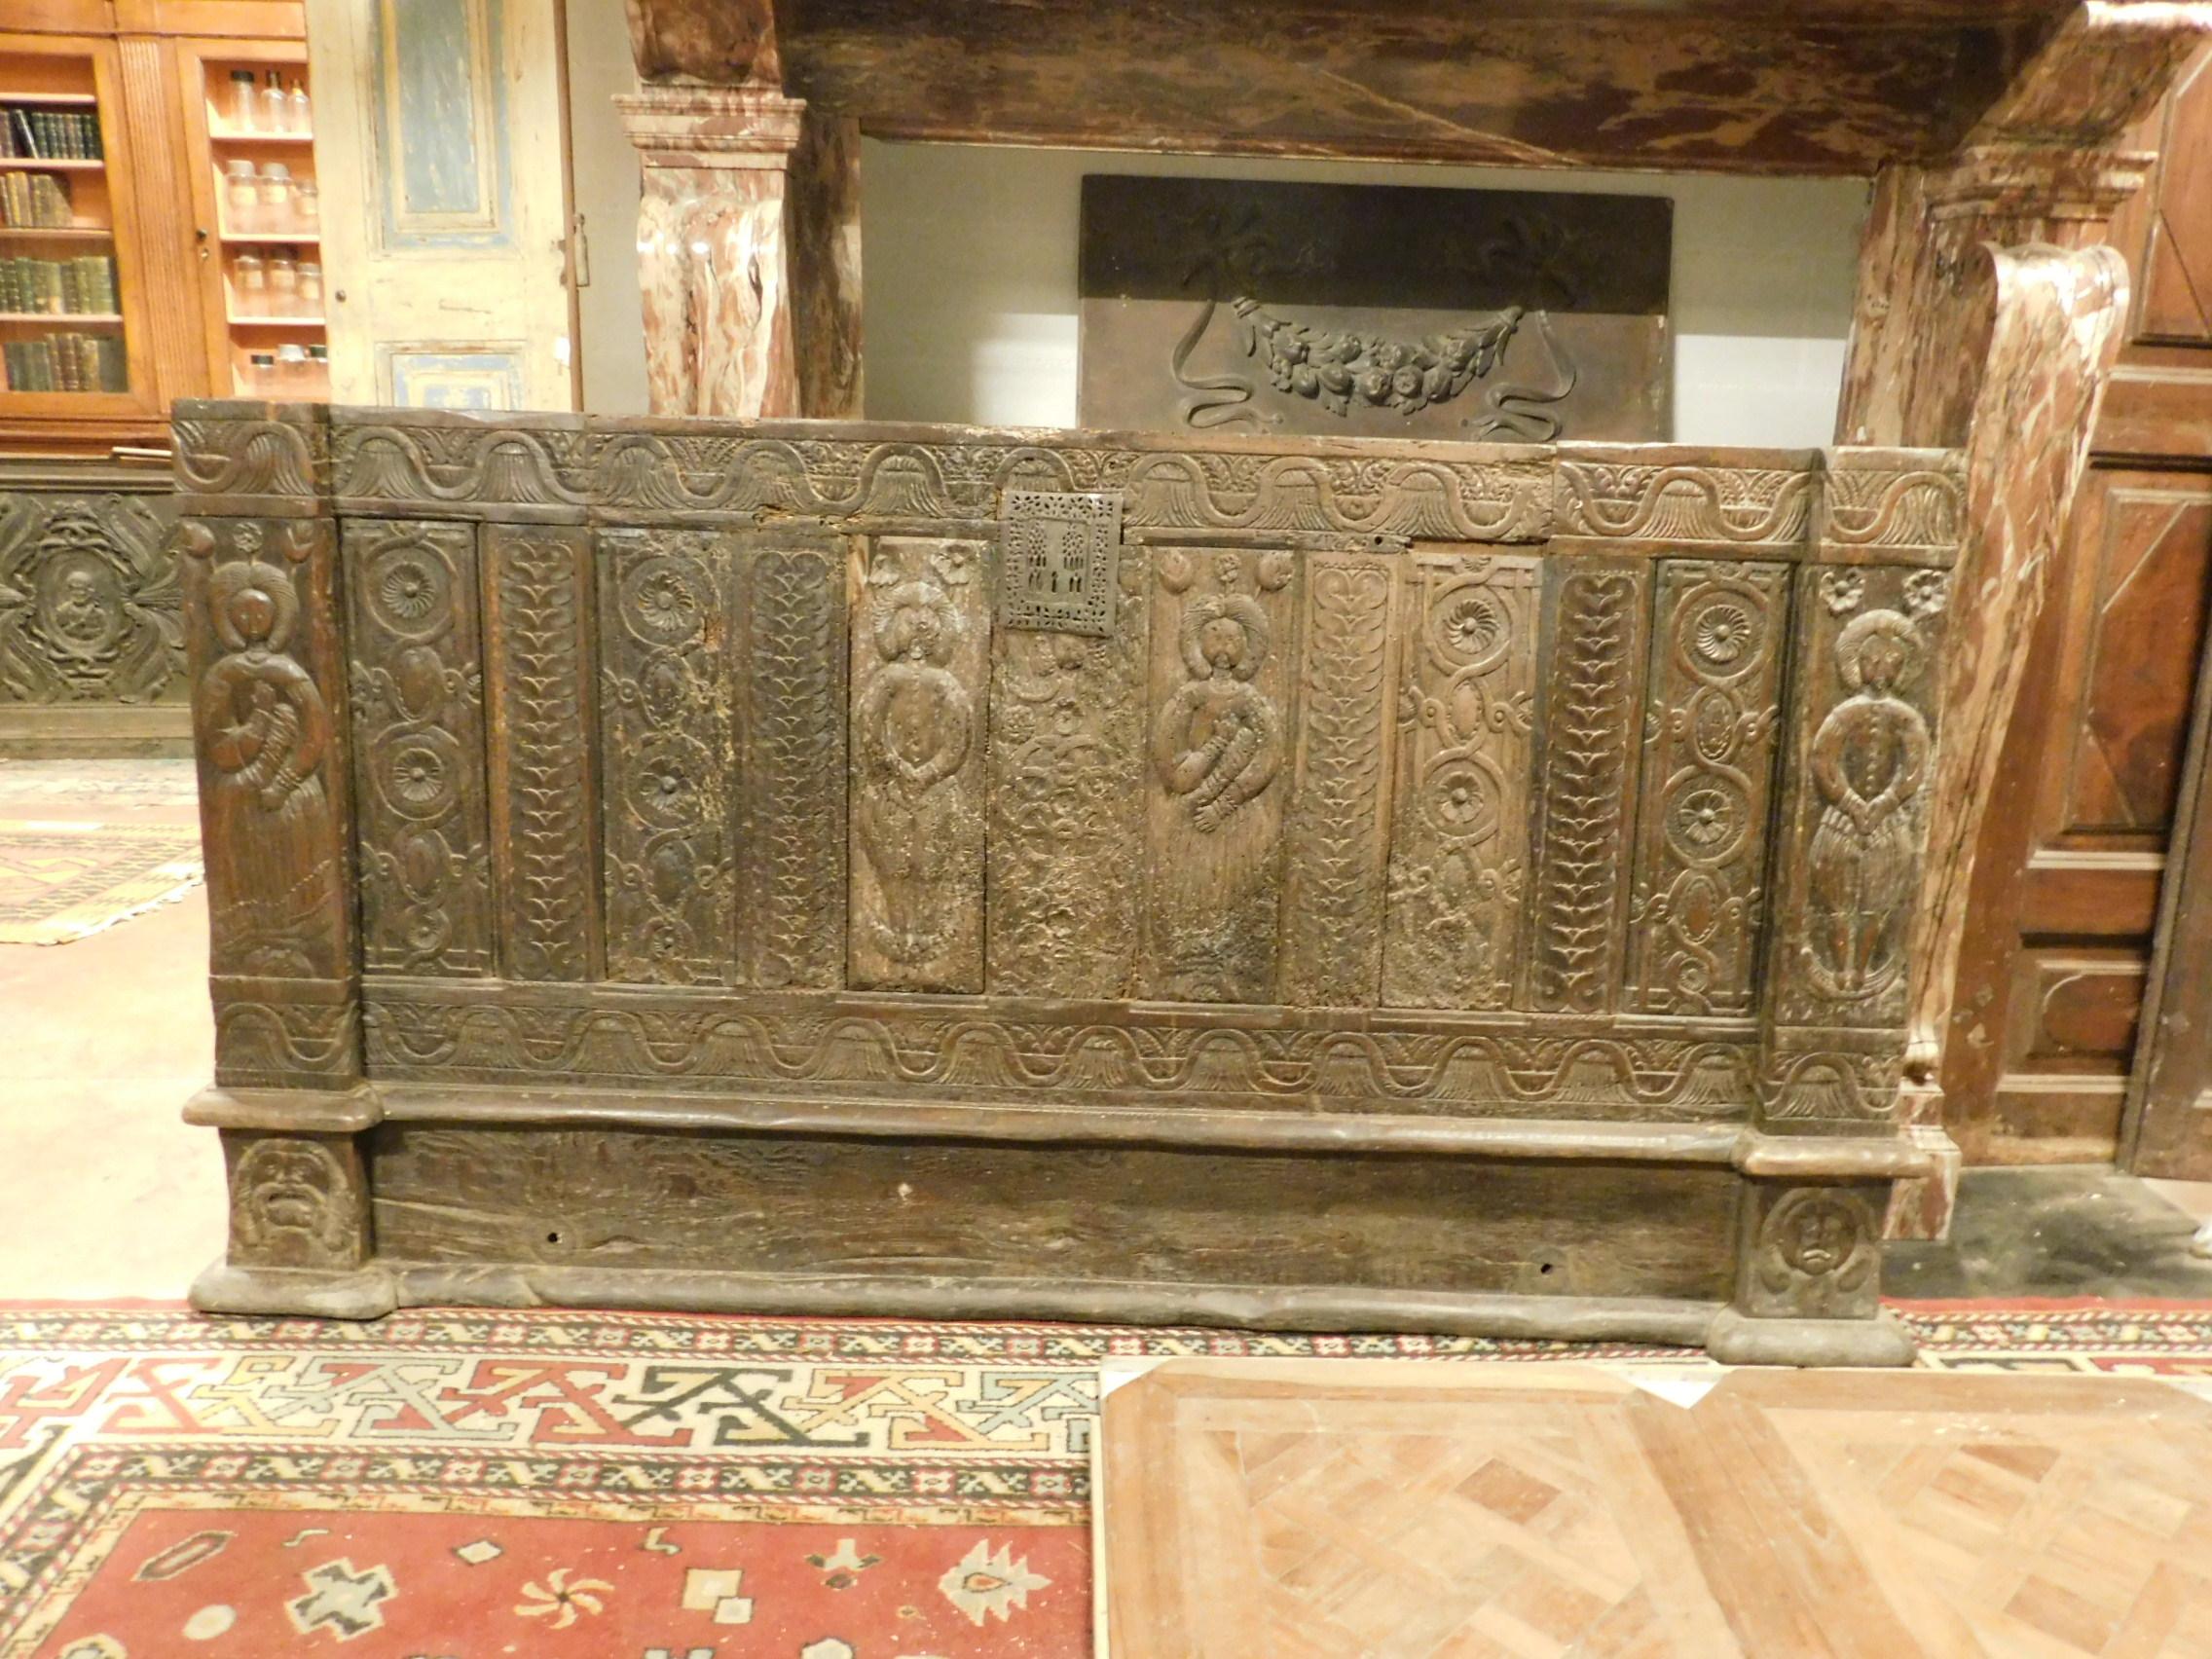 Ancient panel carved in walnut wood with human figures, very decorated with typical forms of the century, all original, from Spain, 1500. Very ancient, it can be used to decorate a wall or for the headboard of a bed, very precious and unavailable in